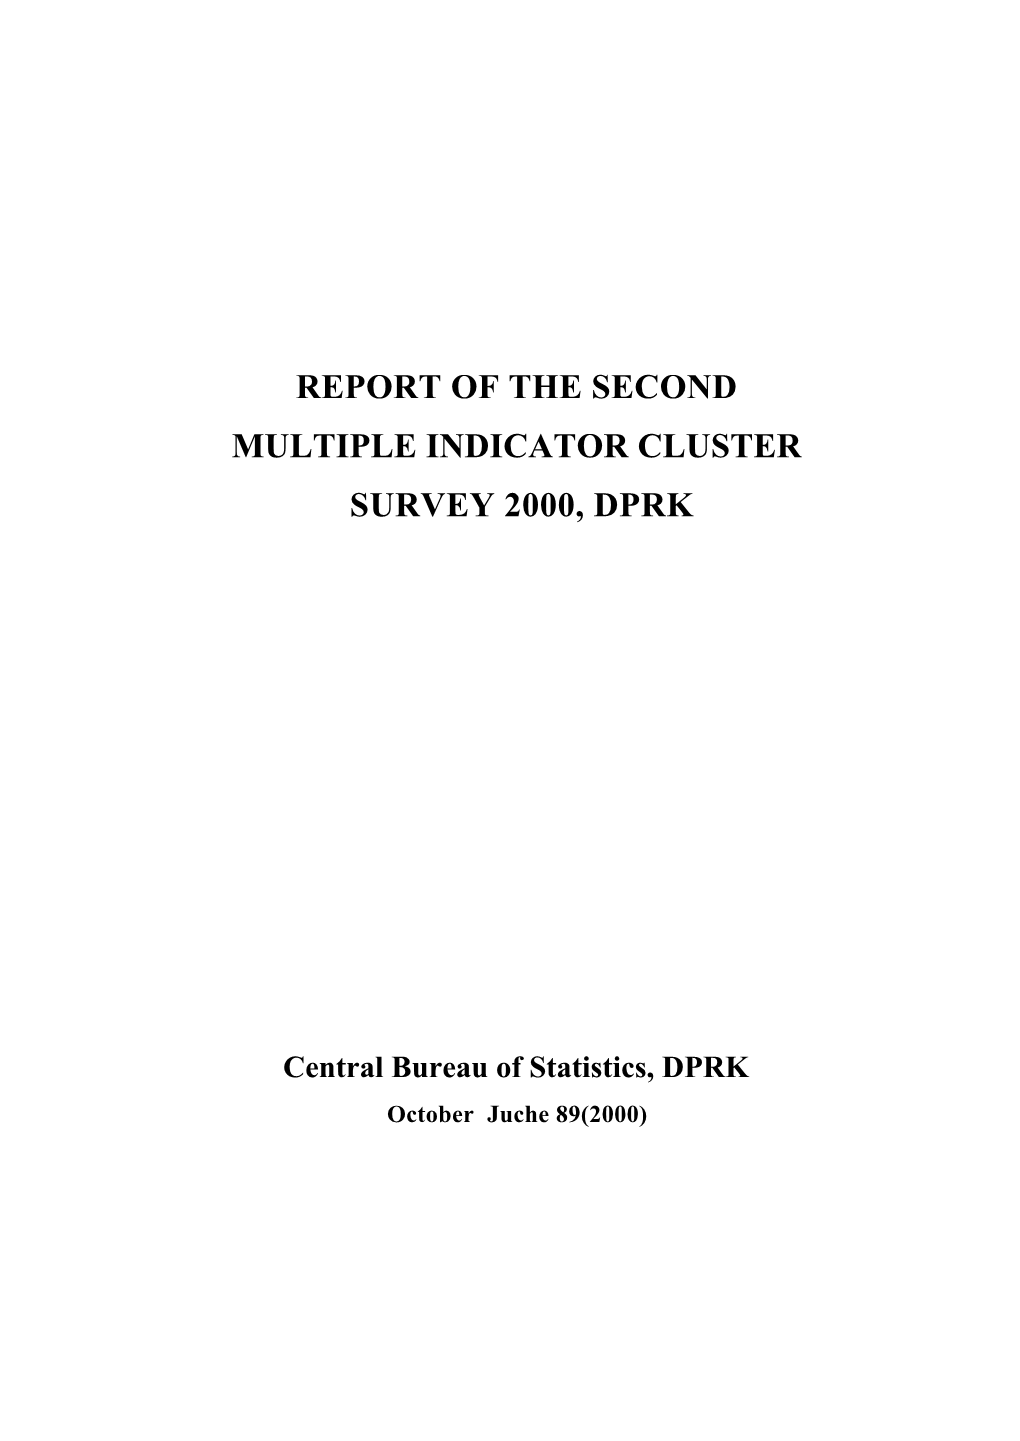 Report of the Second Multiple Indicator Cluster Survey 2000, Dprk